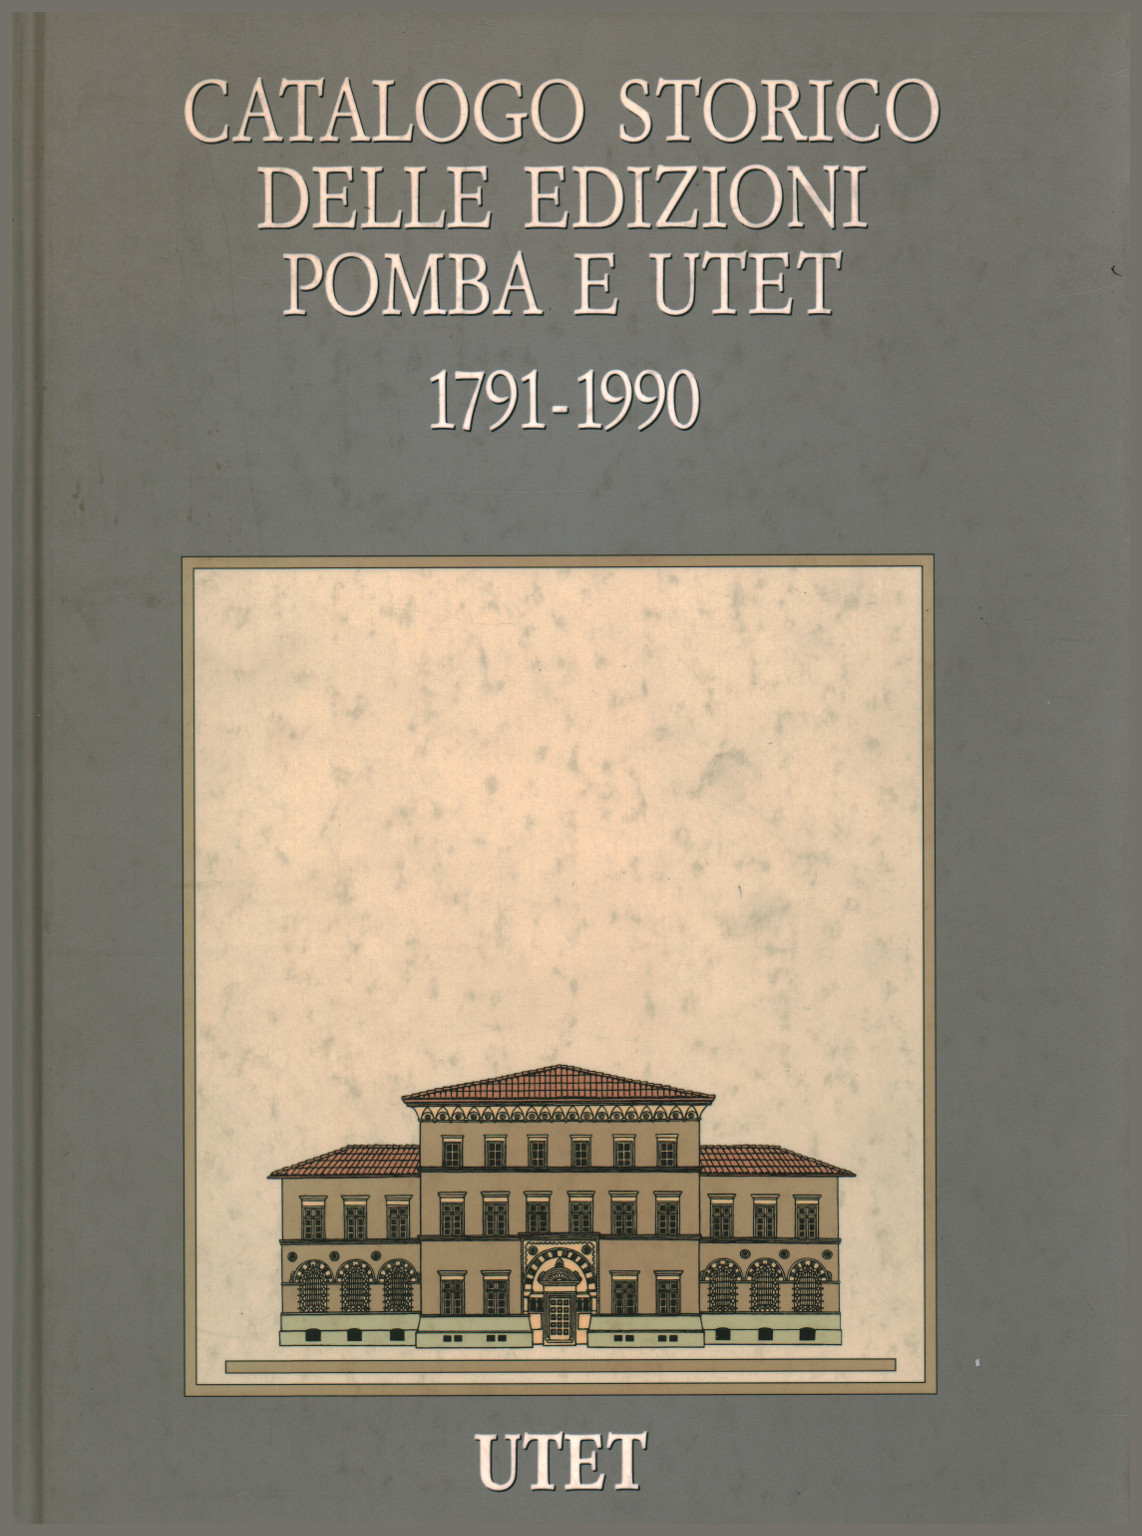 Historical catalog of Pomba editions and%